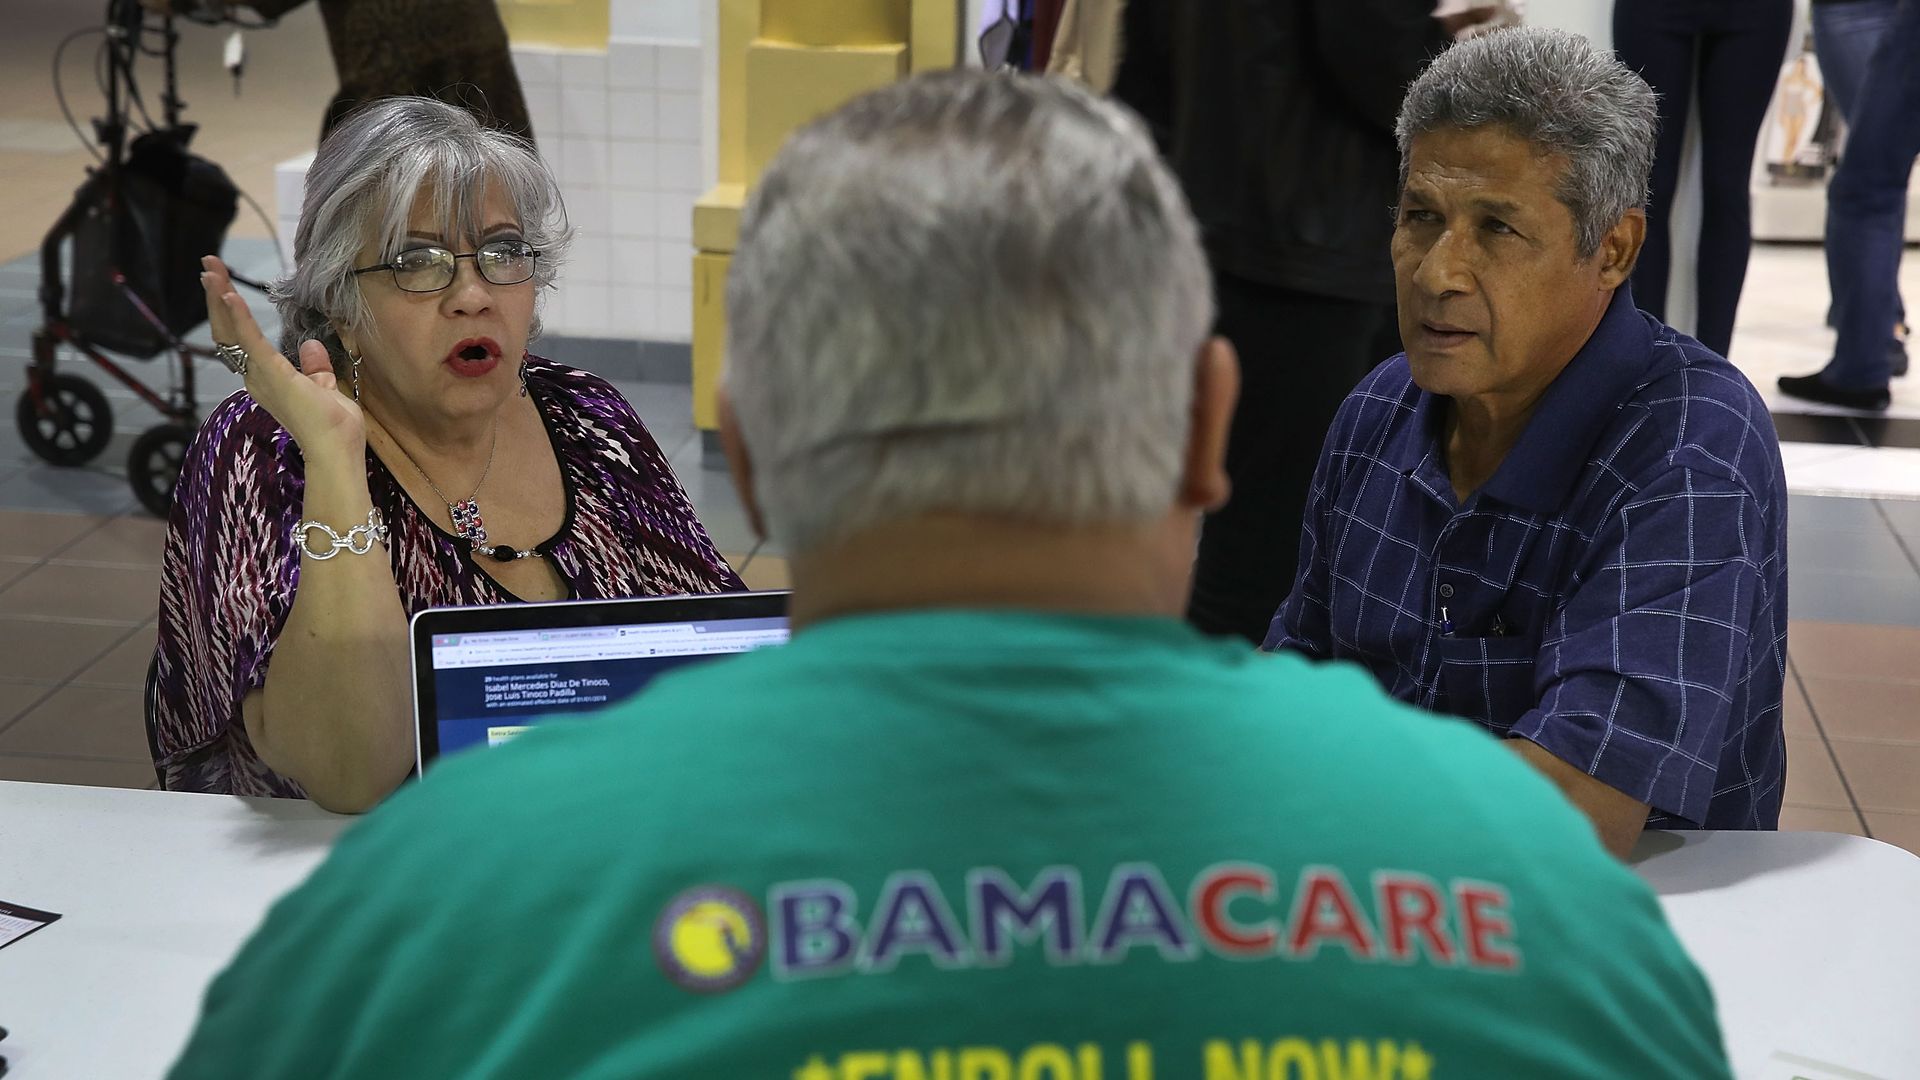 A man helps two Florida residents sign up for insurance under Obamacare